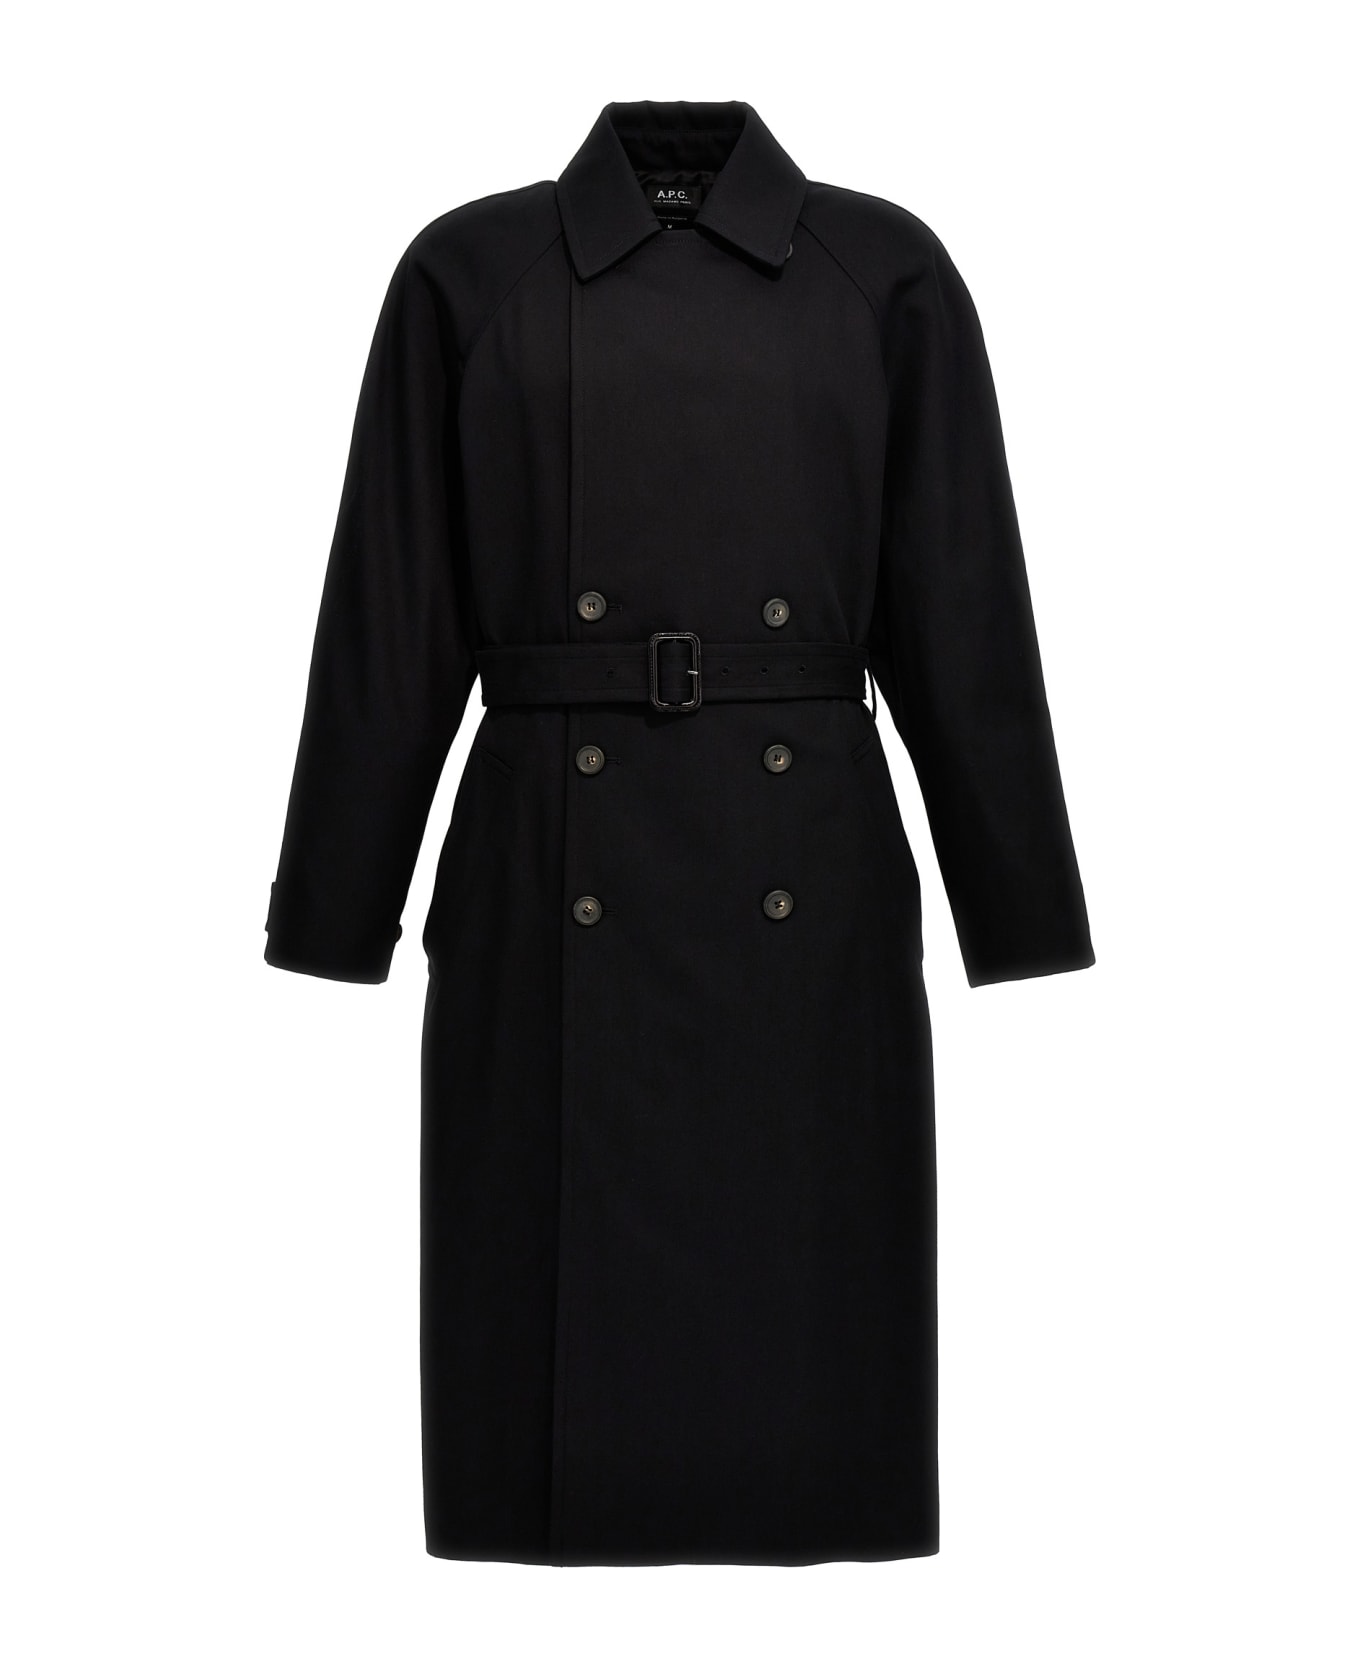 A.P.C. Double-breasted Trench Coat - Black